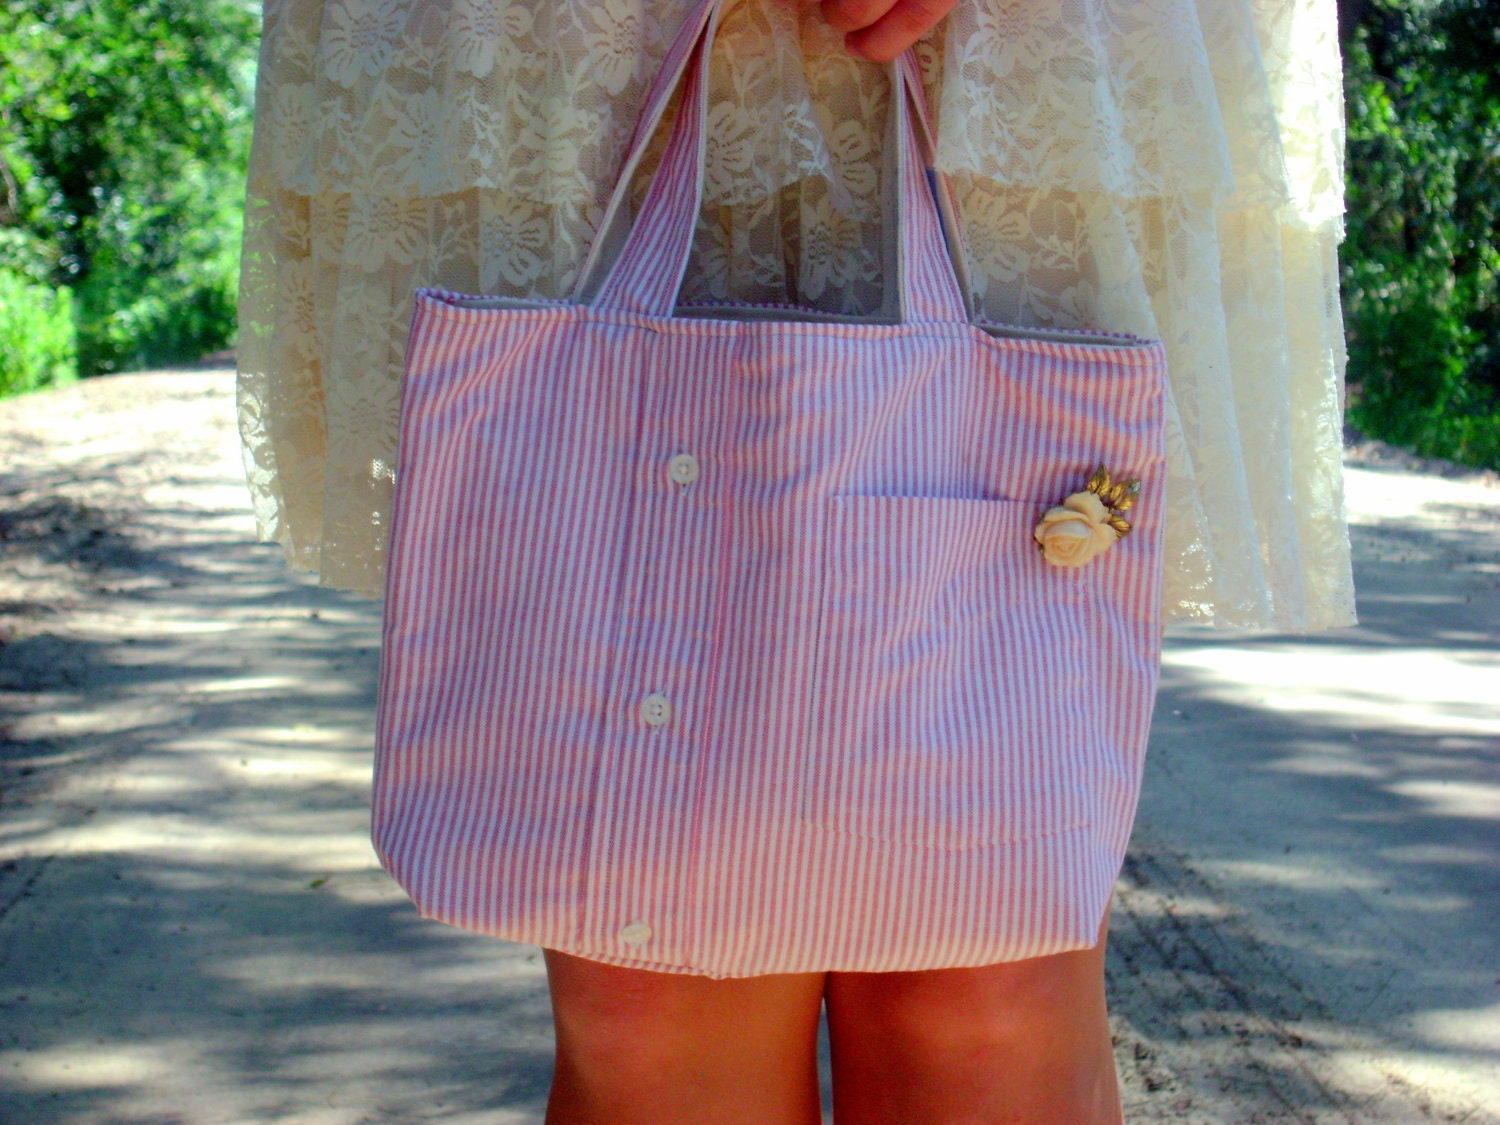 Pink and White Seersucker Shirt Purse with Vintage Broach